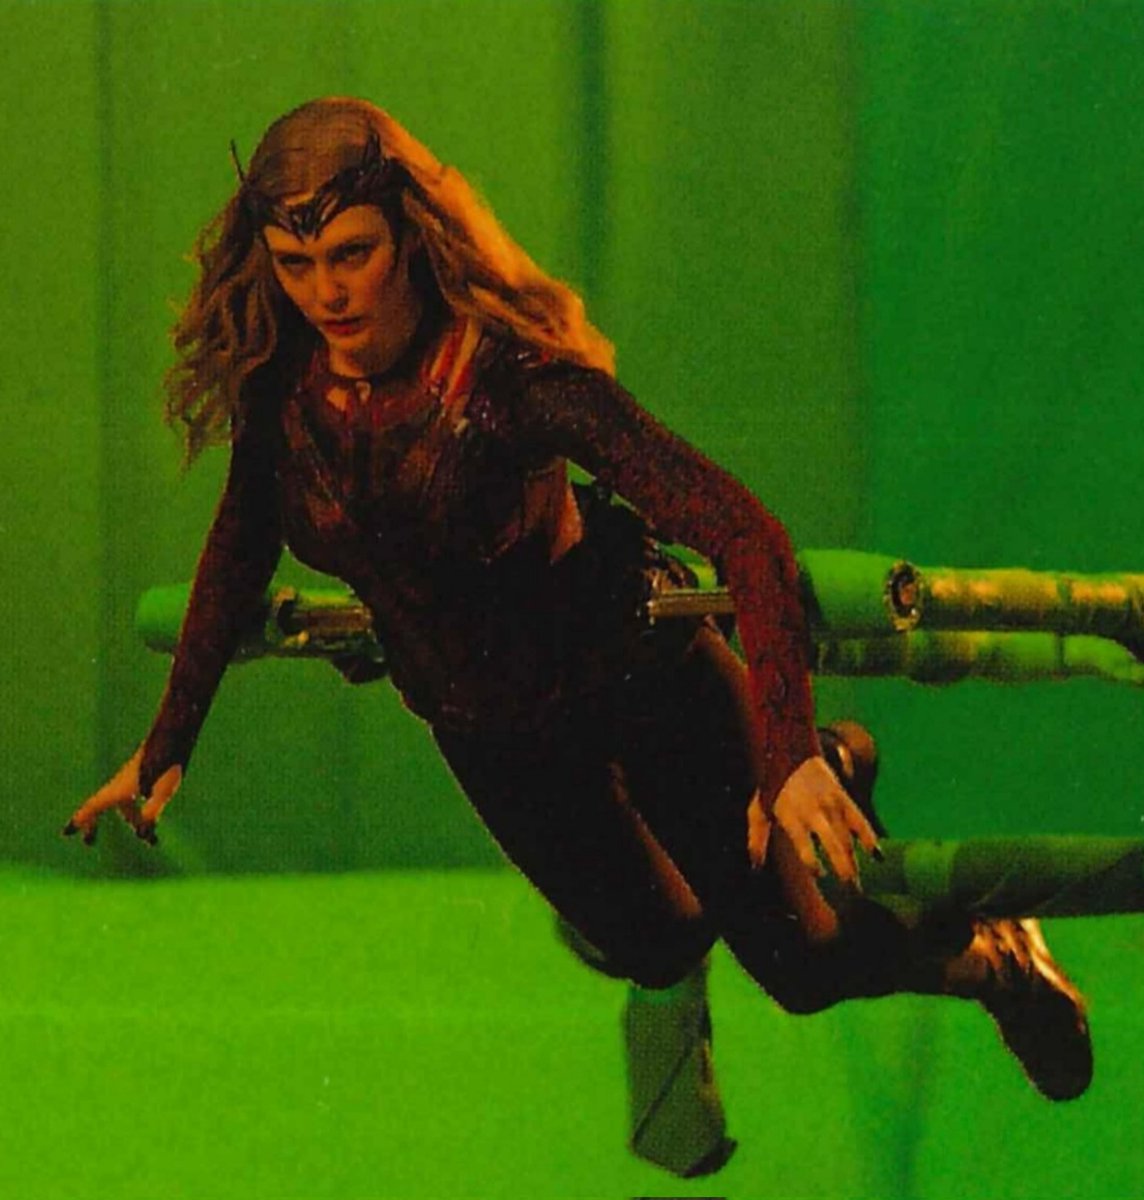 Behind-the-scenes picture of Elizabeth Olsen as the Scarlet Witch (with slightly better quality) #MultiverseOfMadness